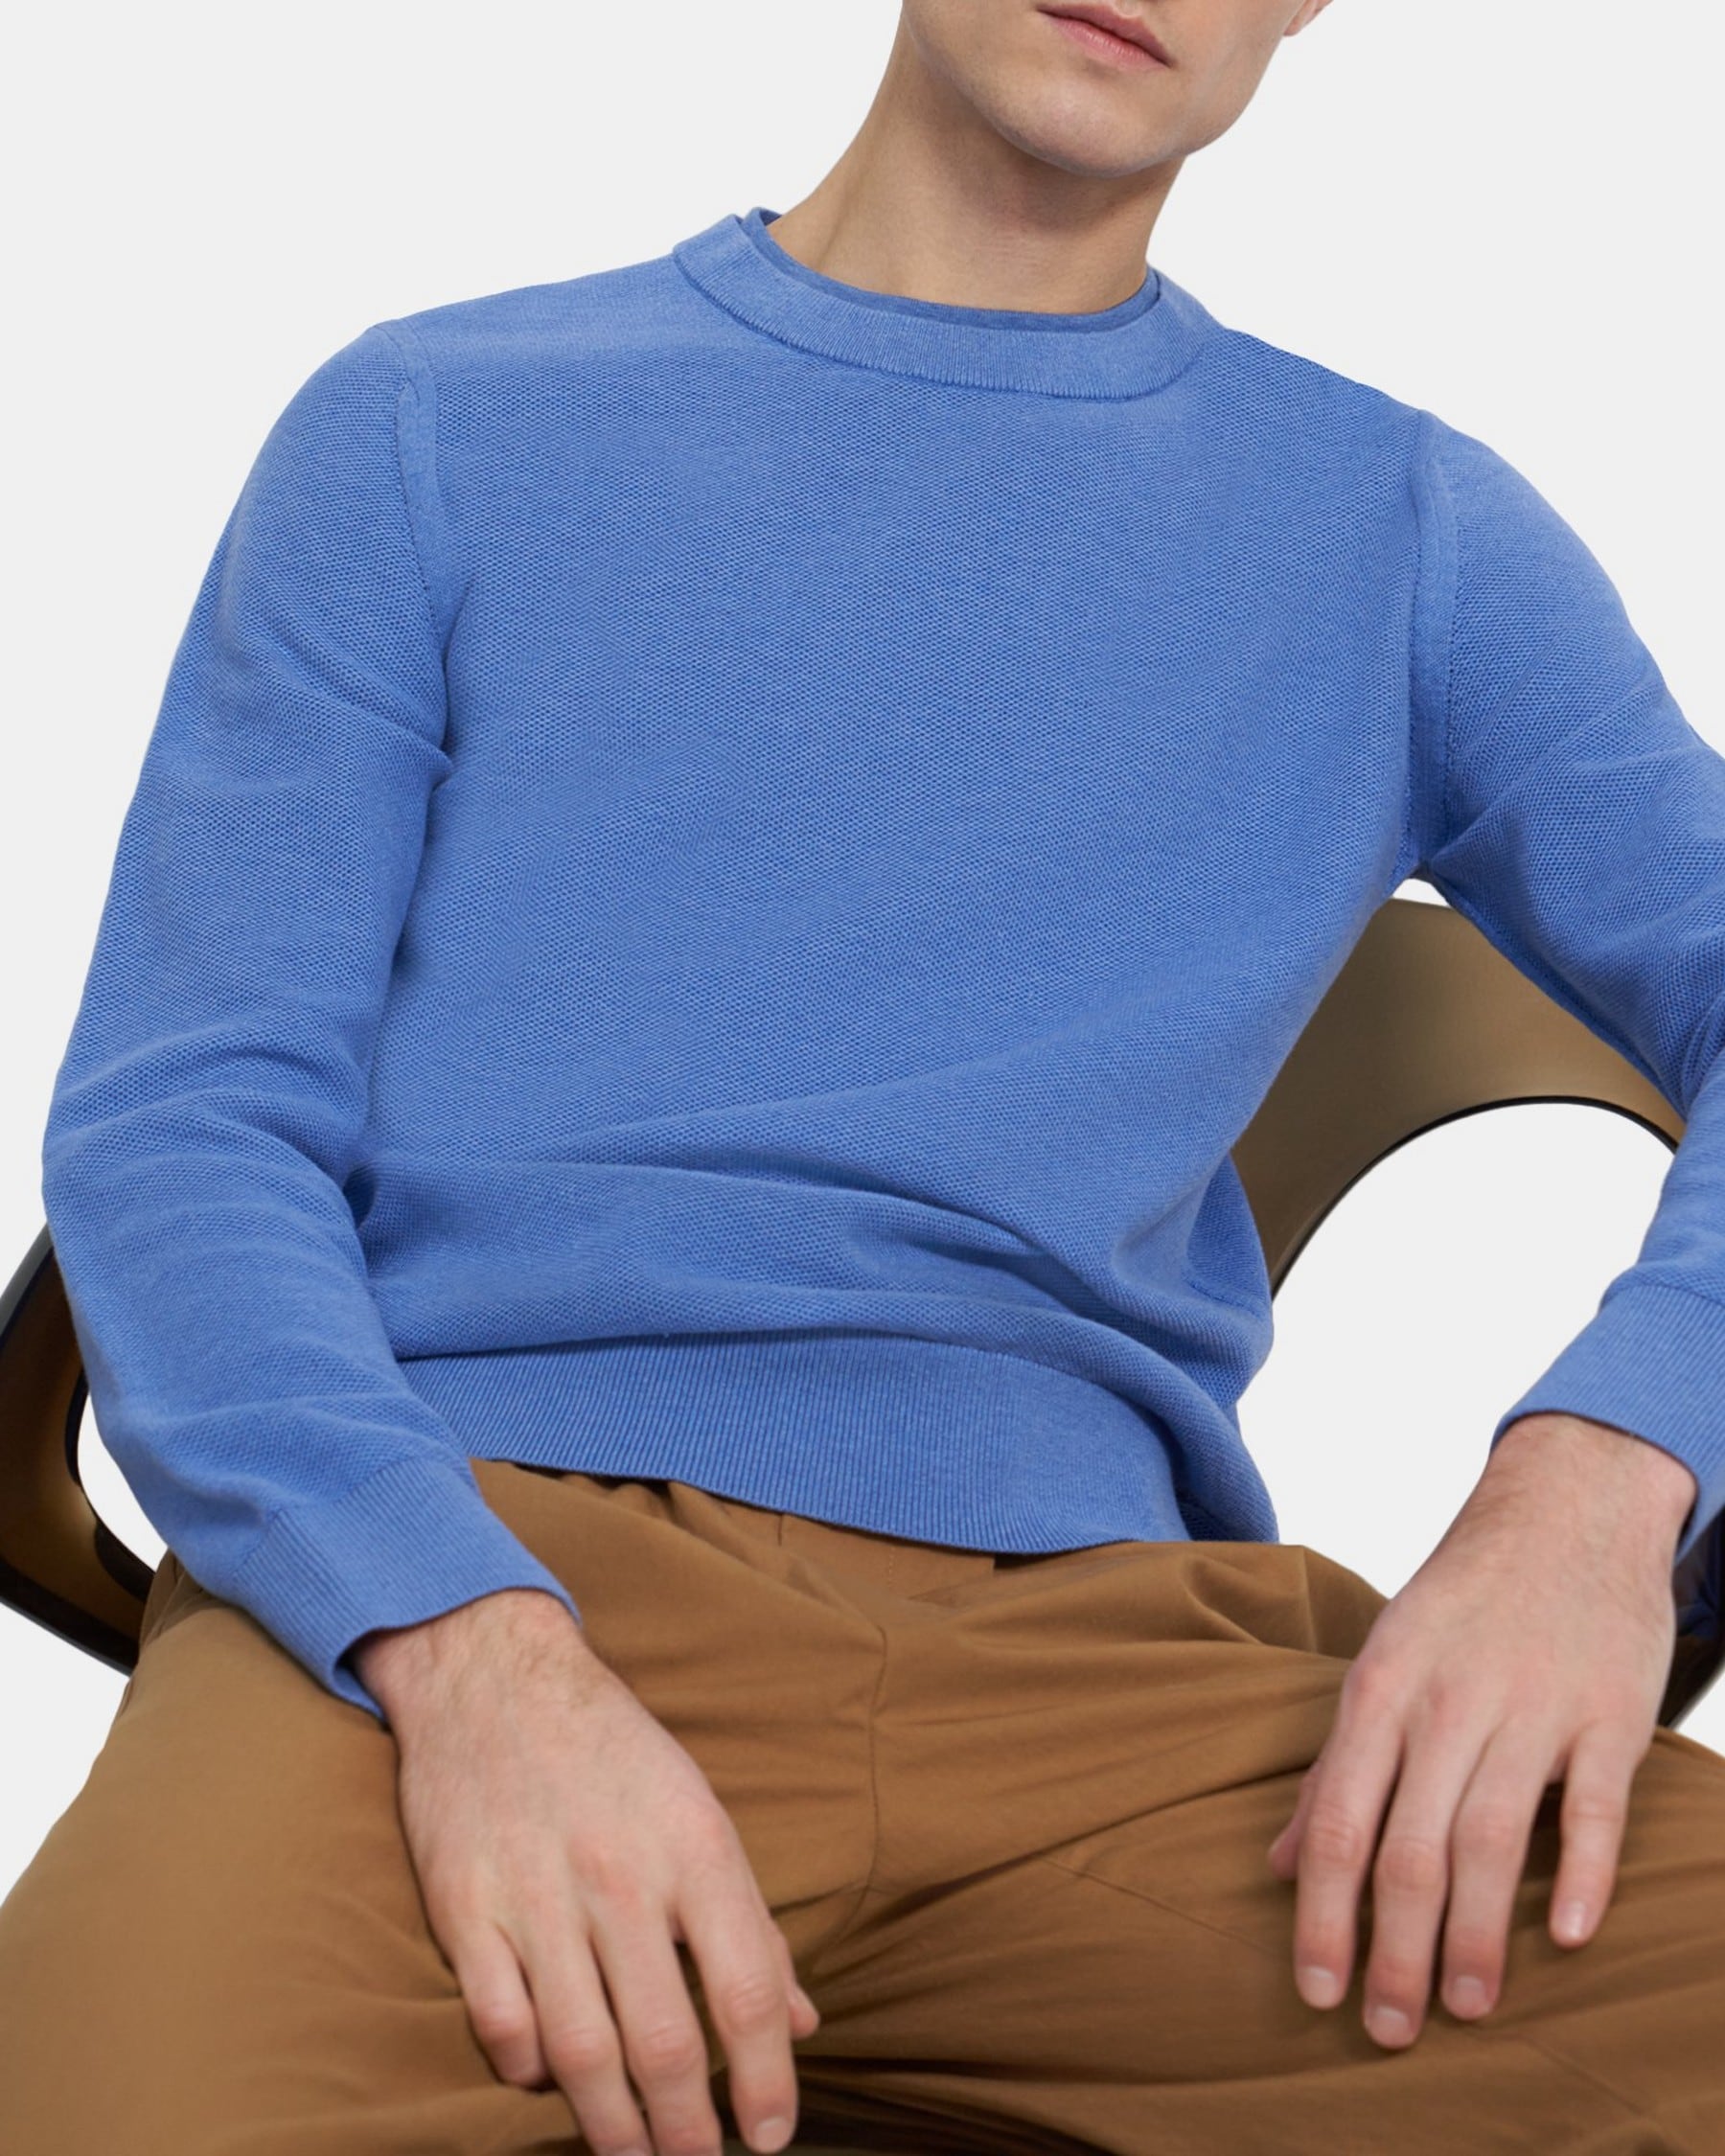 Honeycomb Knit Pullover in Organic Cotton